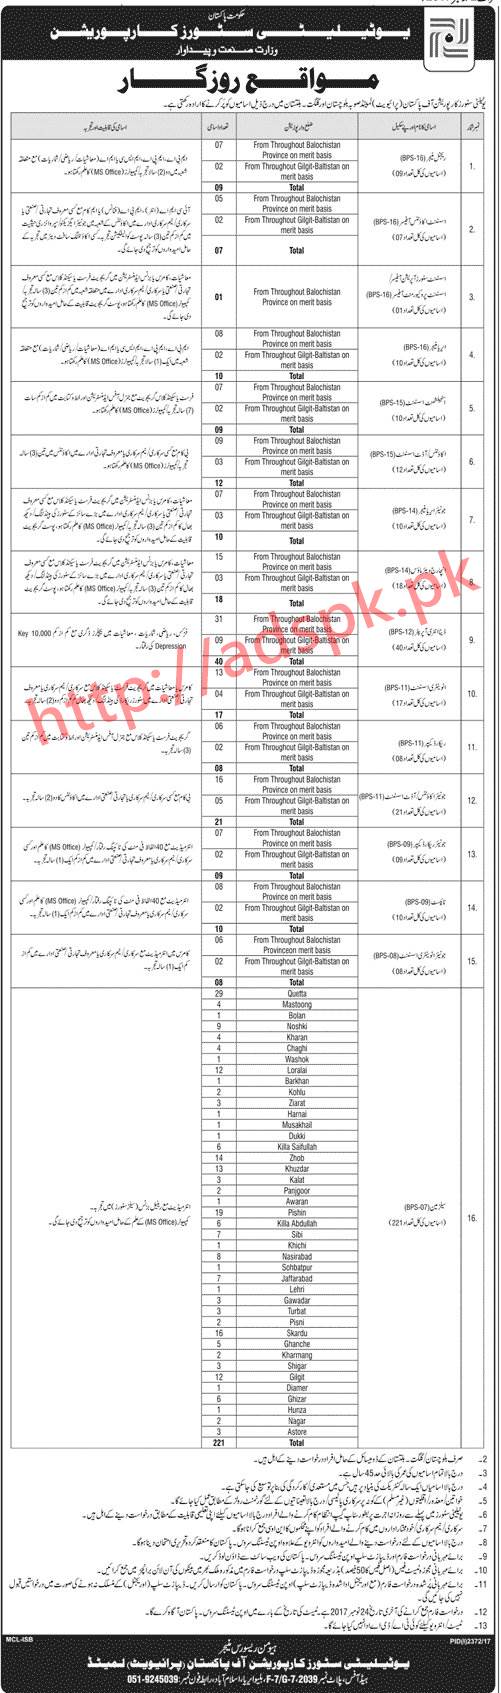 Utility Stores Corporation of Pakistan Private Limited Head Office Islamabad Jobs 2017 OTS MCQs Written Test Syllabus Paper Regional Manager Assistant Accounts Officer Assistant Stores Operation Officer Assistant Procurement Officer Area Manager Establishment Assistant Accounts Audit Assistant Junior Area Manager Incharge Warehouse Data Entry Operator Inventory Assistant Record Keeper Junior Accounts Audit Assistant Junior Record Keeper Typist Junior Inventory Assistant Salesman Jobs Application Form Deadline 24-11-2017 Apply Now by Open Testing Service